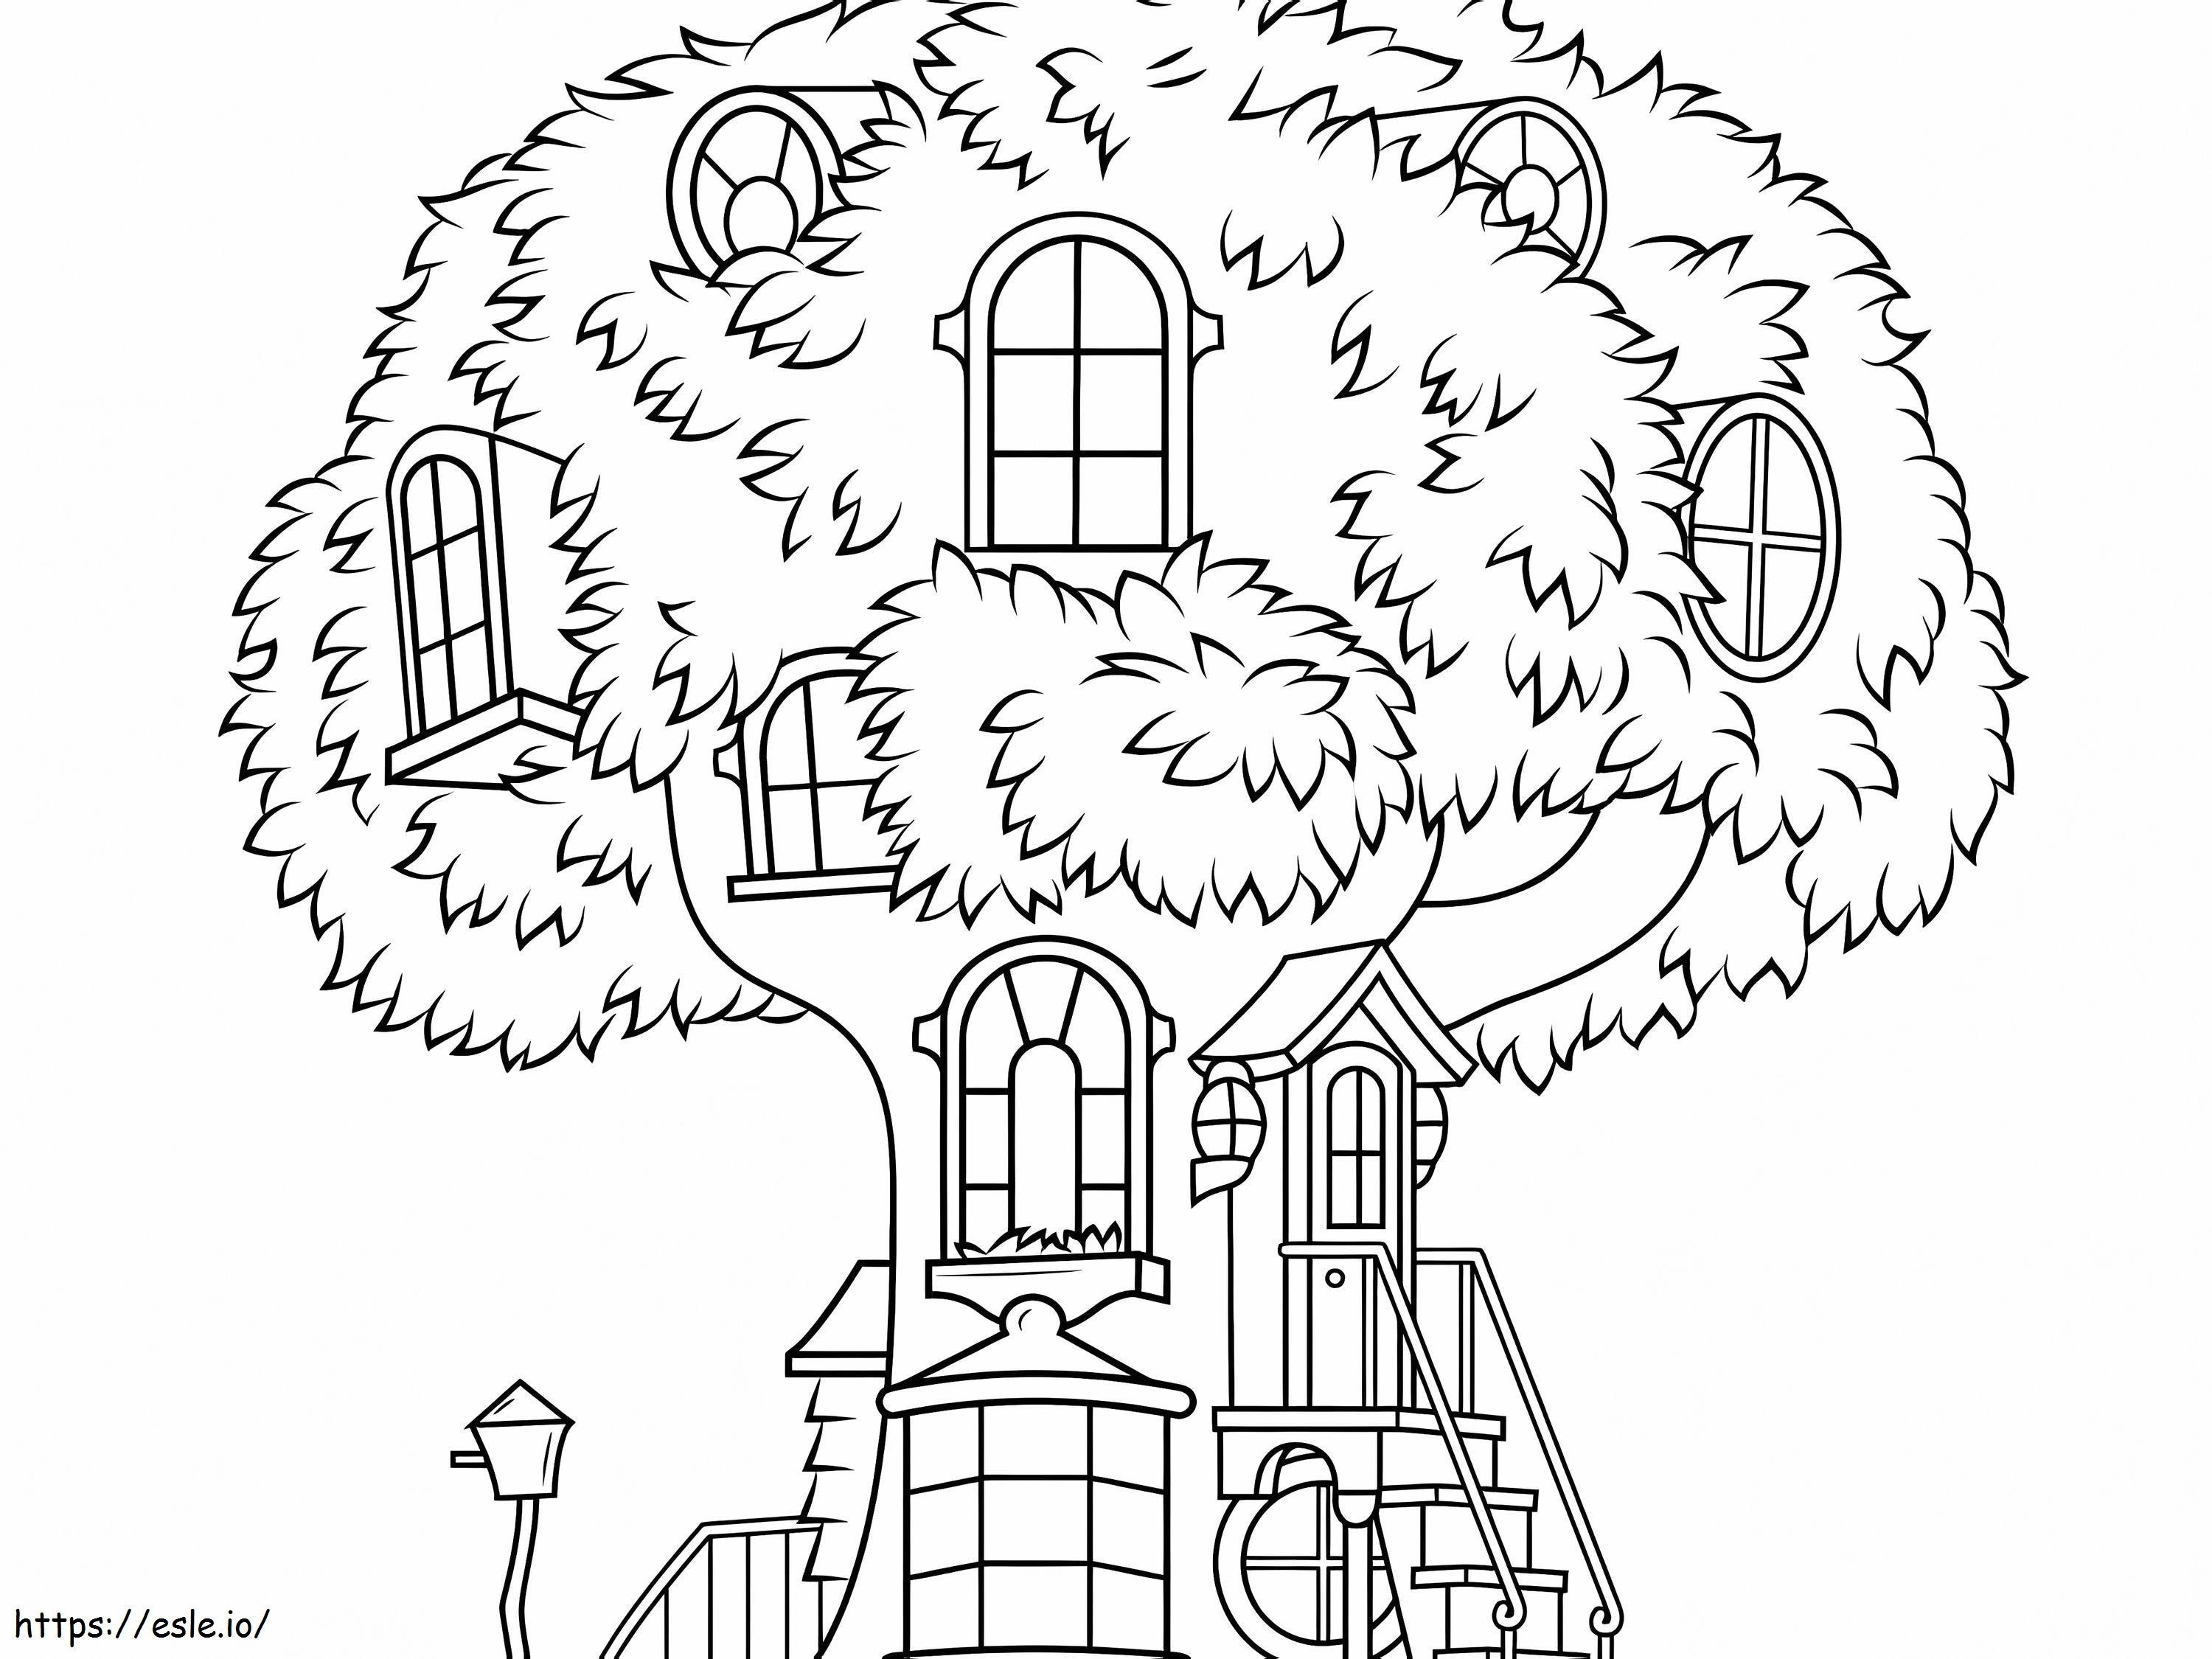 Wonderful Tree House coloring page